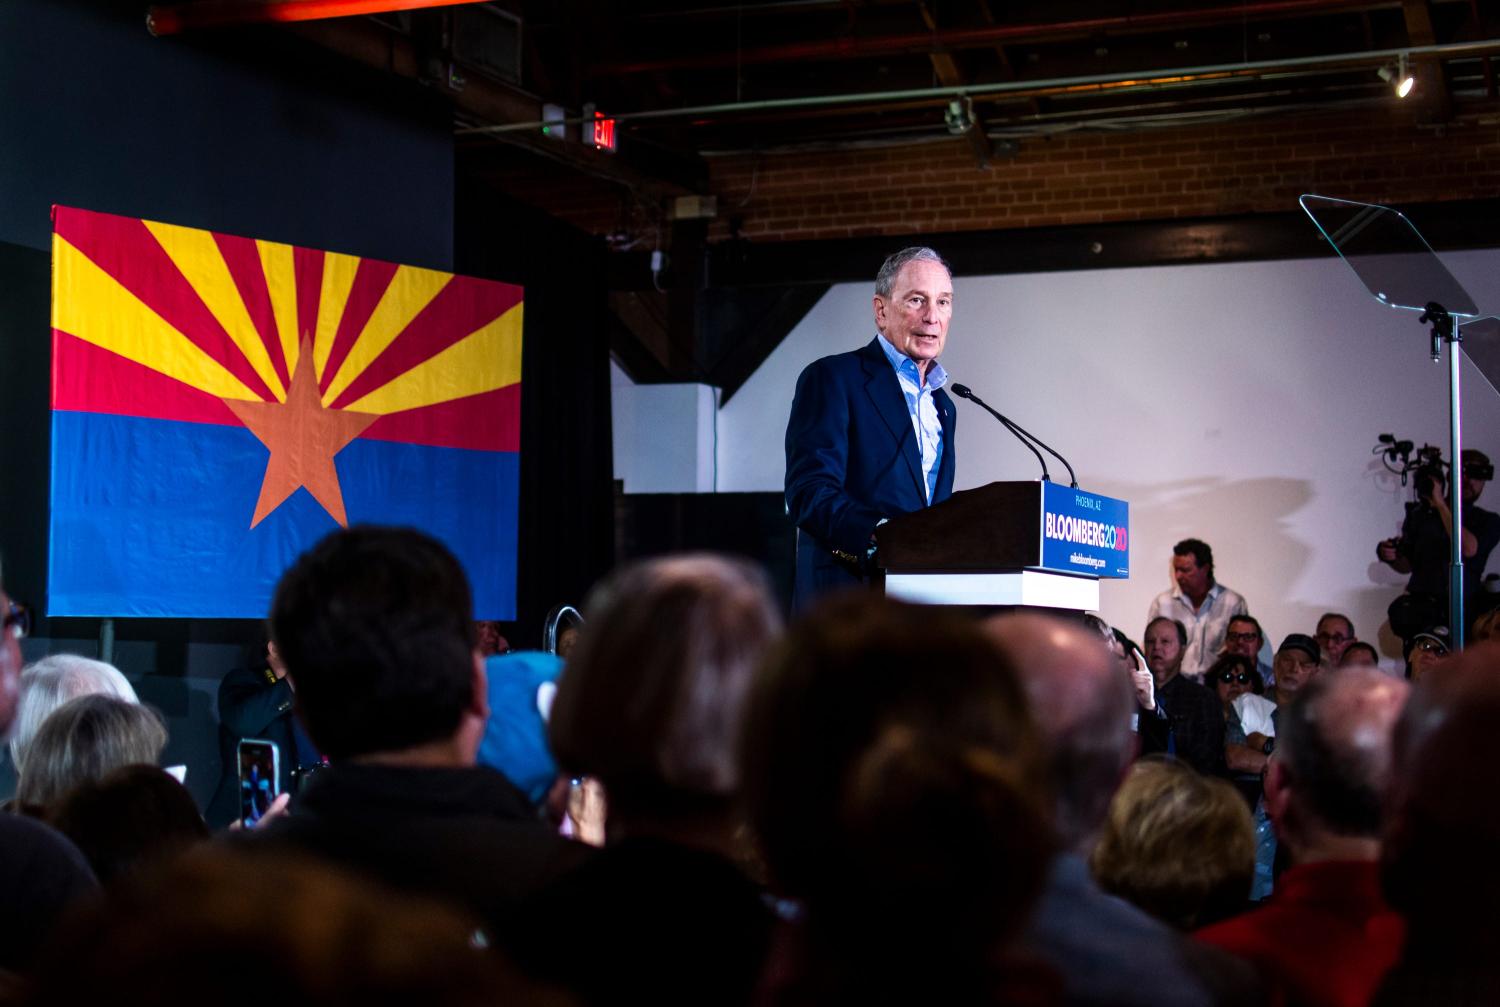 Michael Bloomberg speaks at a 2020 presidential campaign rally in Phoenix on Saturday, Feb. 1, 2020.Mike Bloomberg rally Feb. 1, 2020